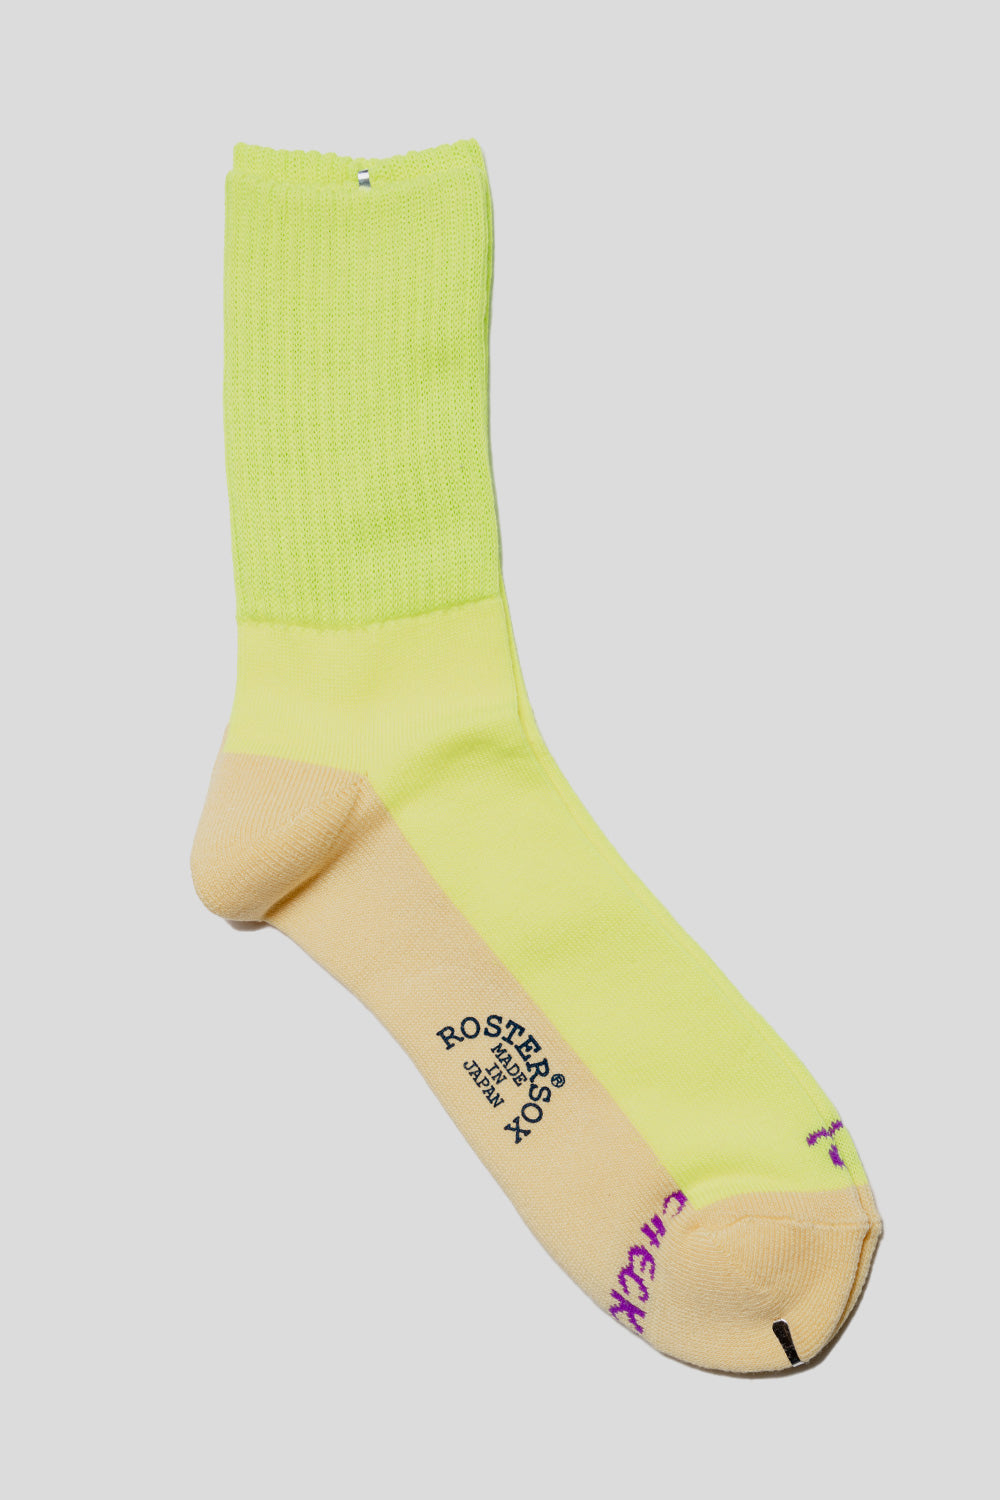 Rostersox Neo Socks in Yellow